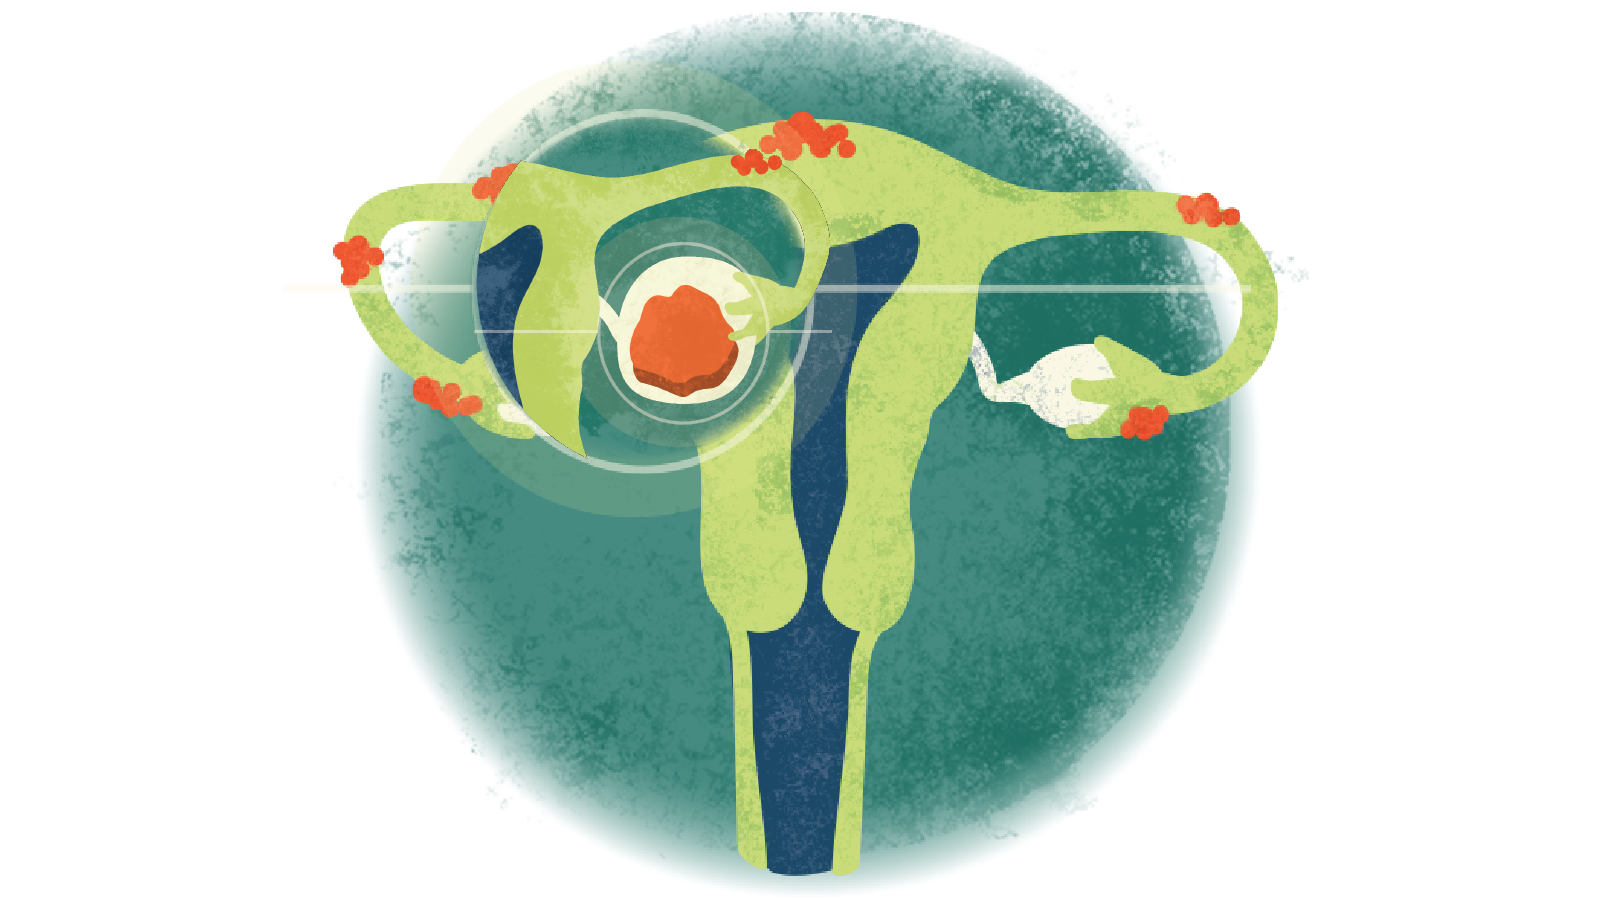 Illustration of an endometria in a circle over a uterus with endometriosis